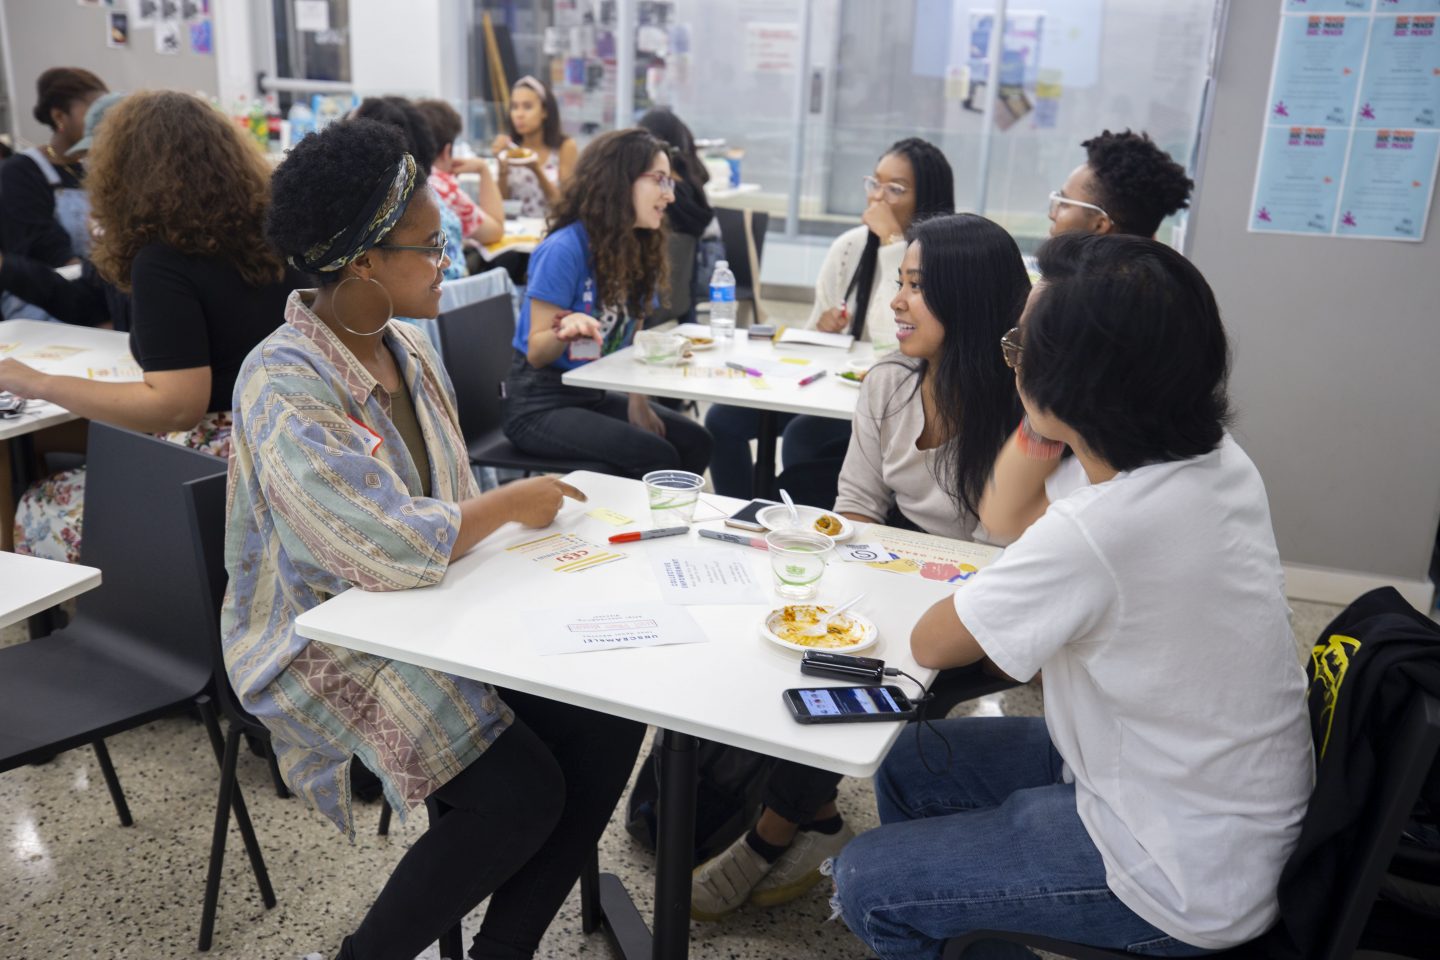 The Office of Civic Engagement and Social Justice helps students make the connection between their academic studies and their passion for social justice work (photo credit: Julian Budge)